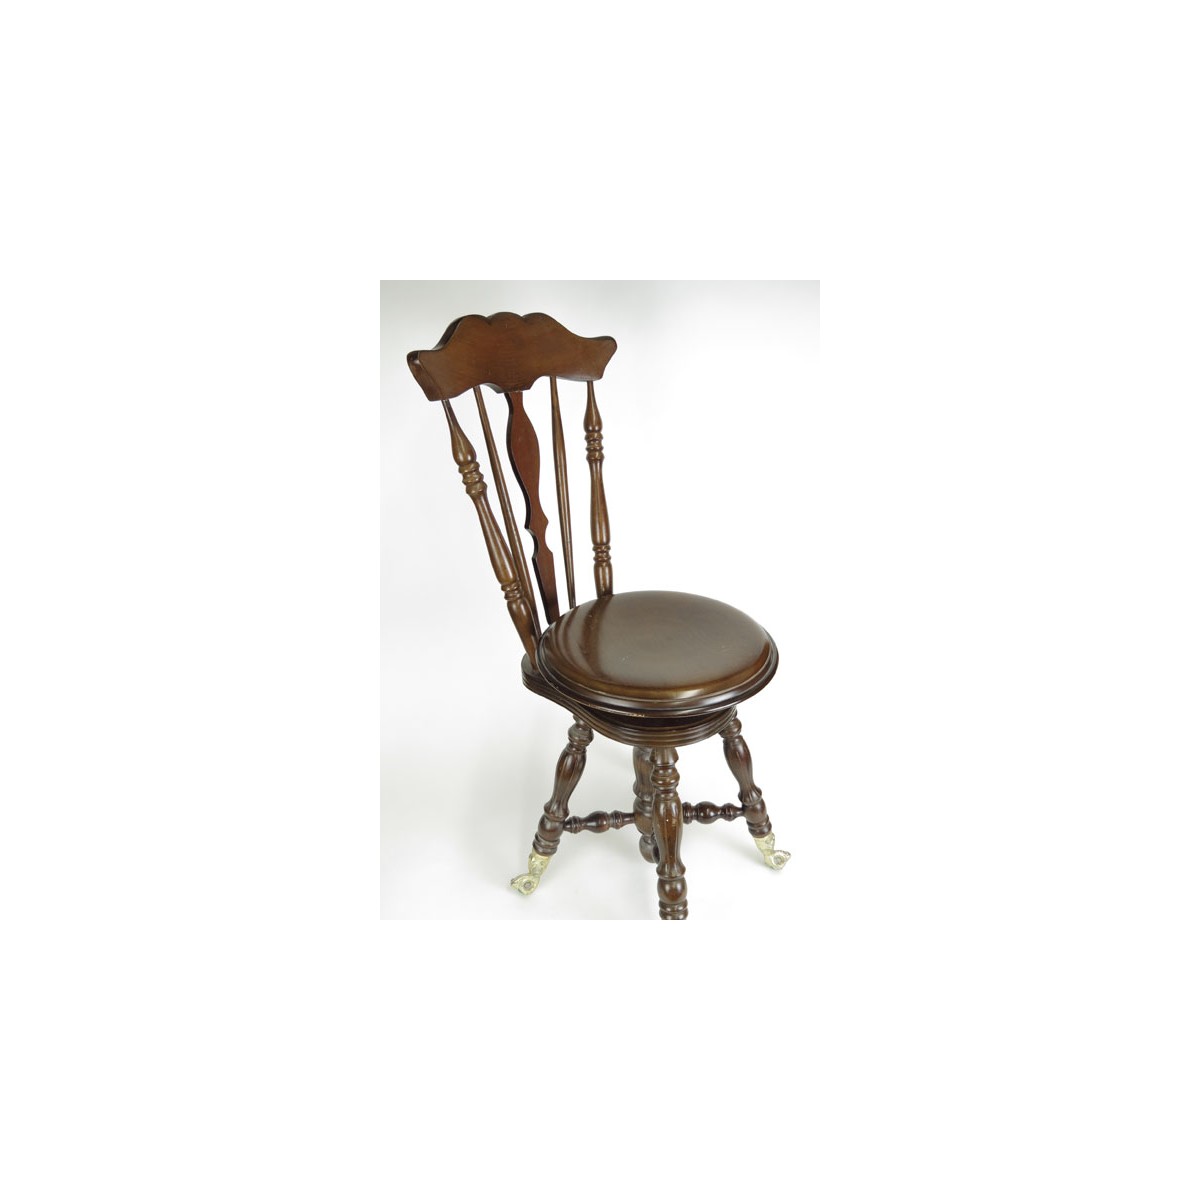 20th Century Victorian style Piano Chair with Revolving Seat and